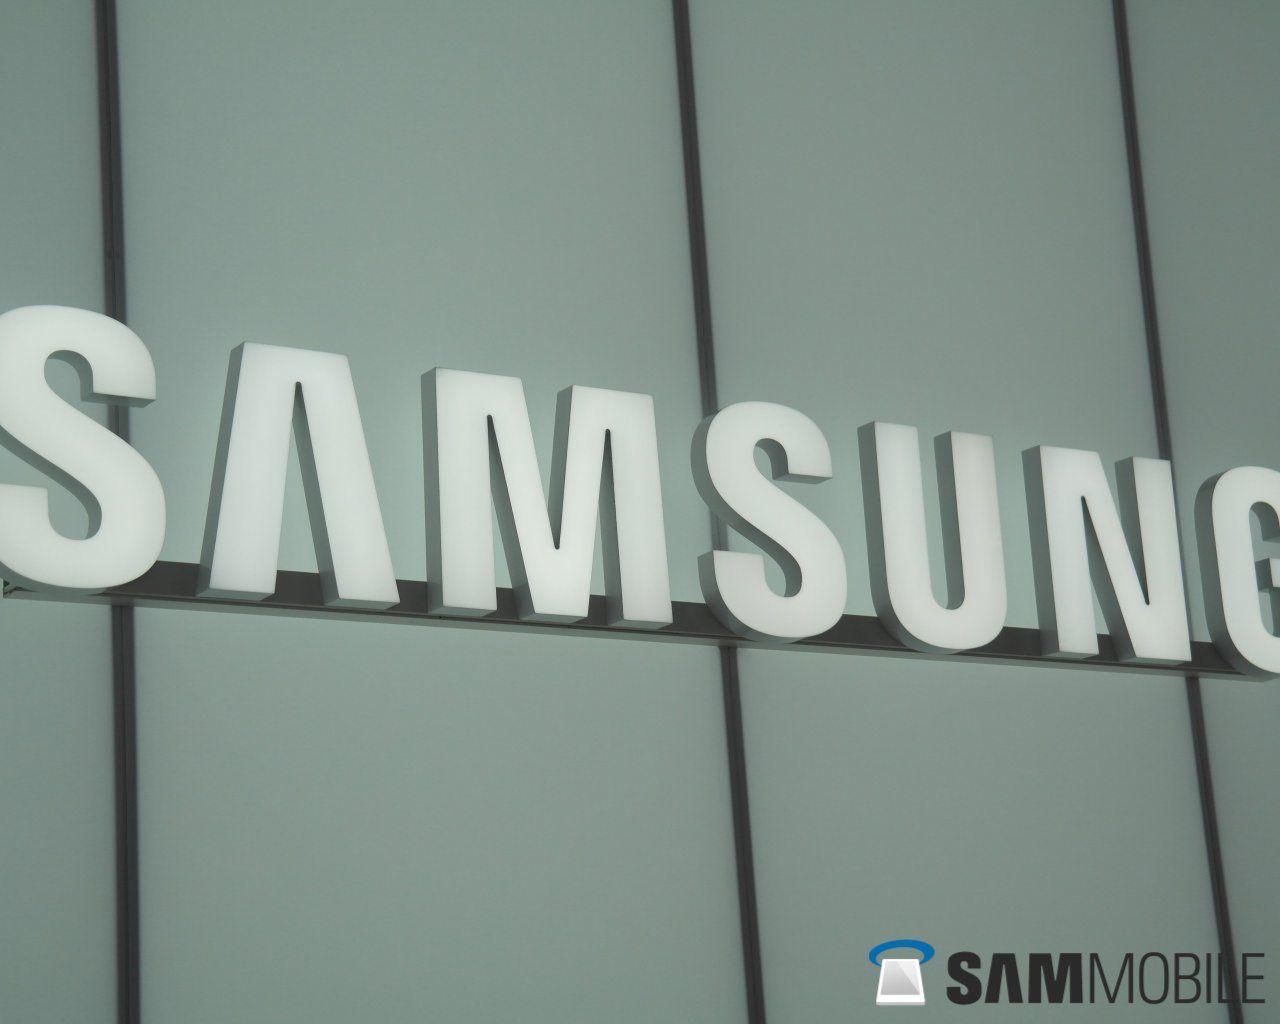 Messaging Smasmung Logo - Samsung and Google collaborate for RCS messaging across their